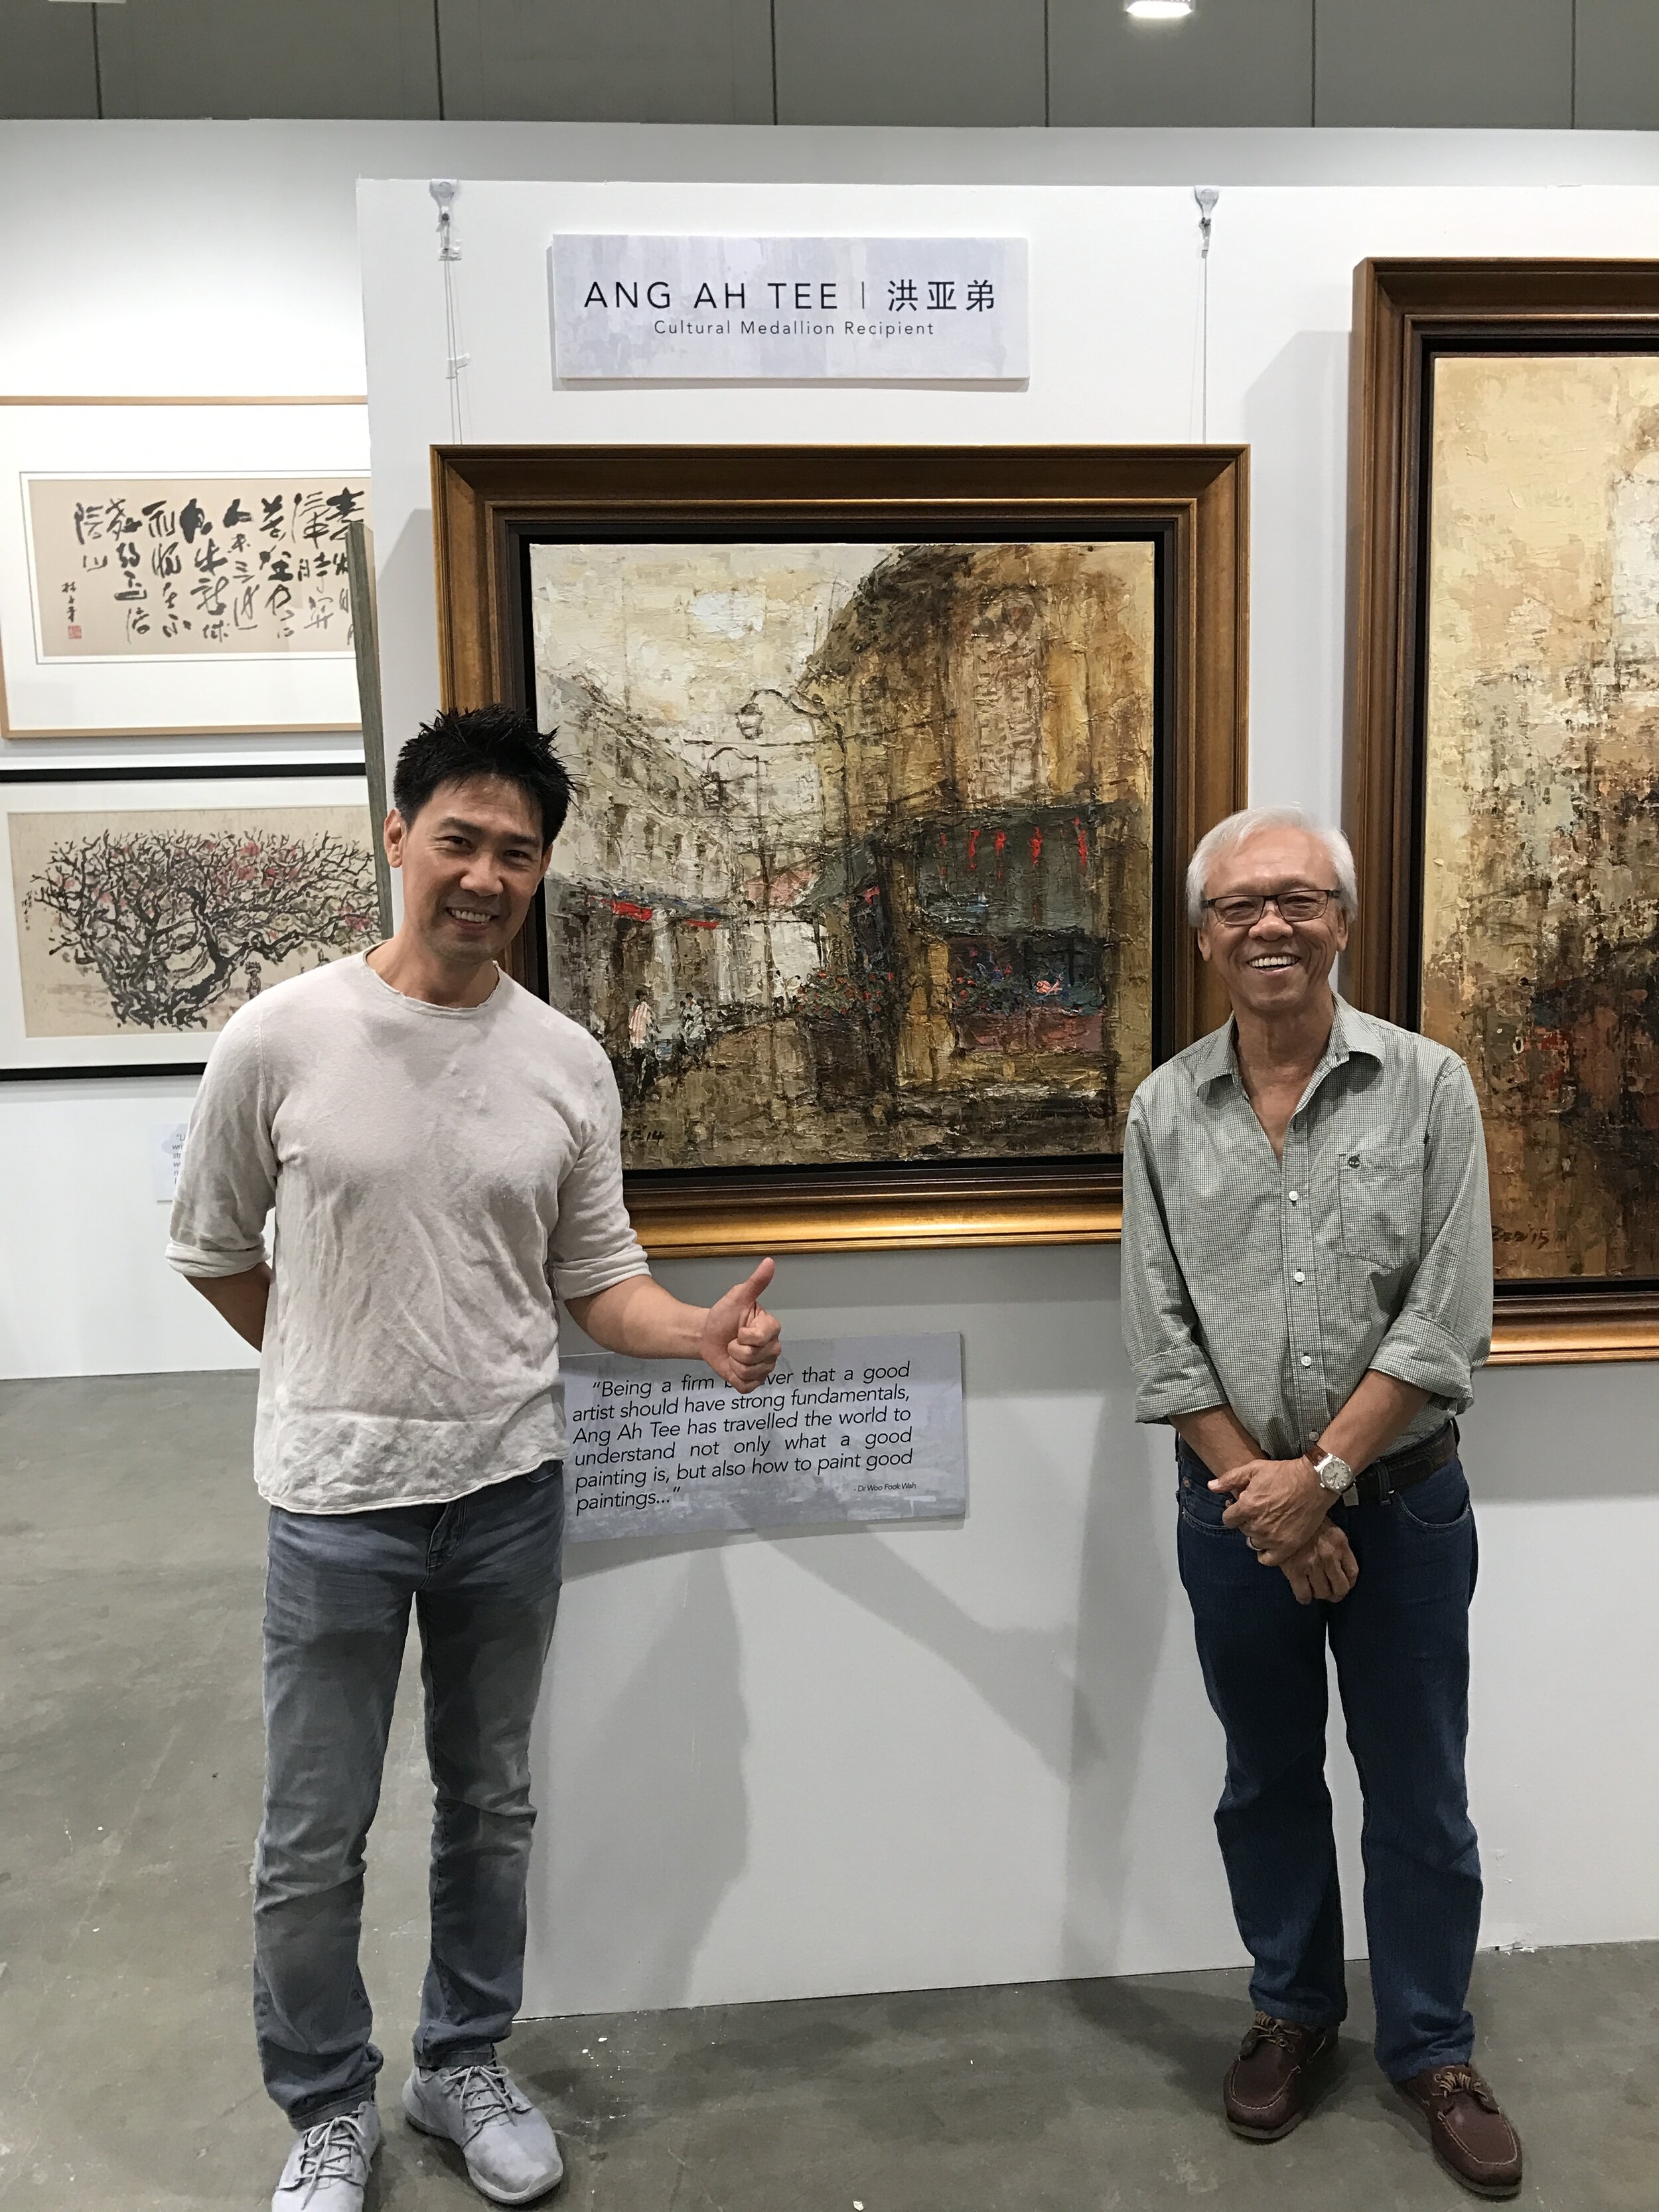  Ang Ah Tee and his paintings at Art Stage Singapore  